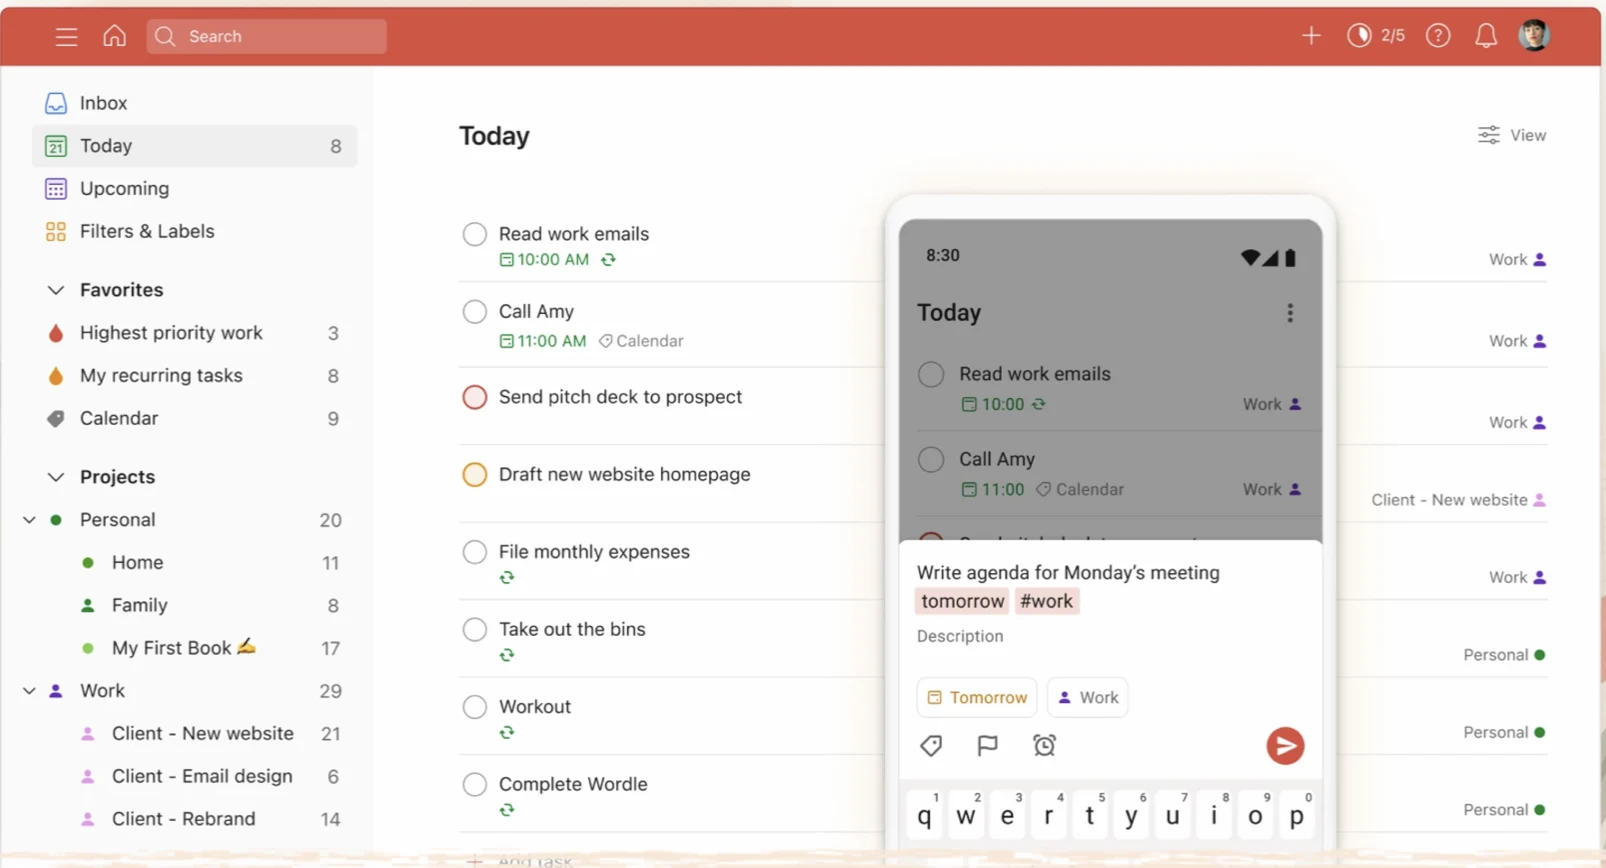 Todoist is a task management and to-do list software that lets you organize and track your tasks and projects. You can also connect your email, calendar, and files to Todoist to simplify workflows.